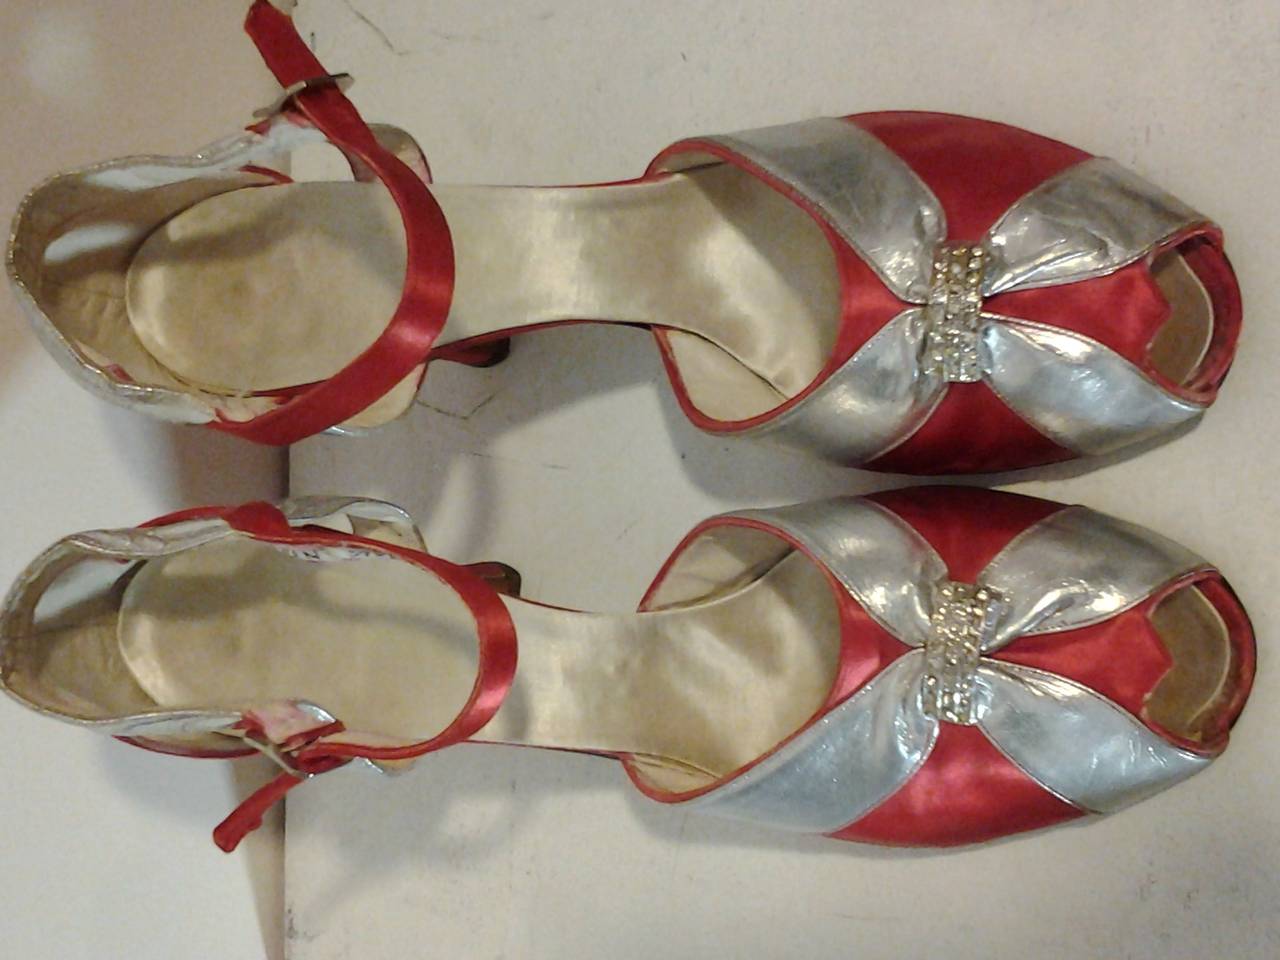 Brown 1930s Evening Sandals in Silver Leather and Red Satin - Size 8.5